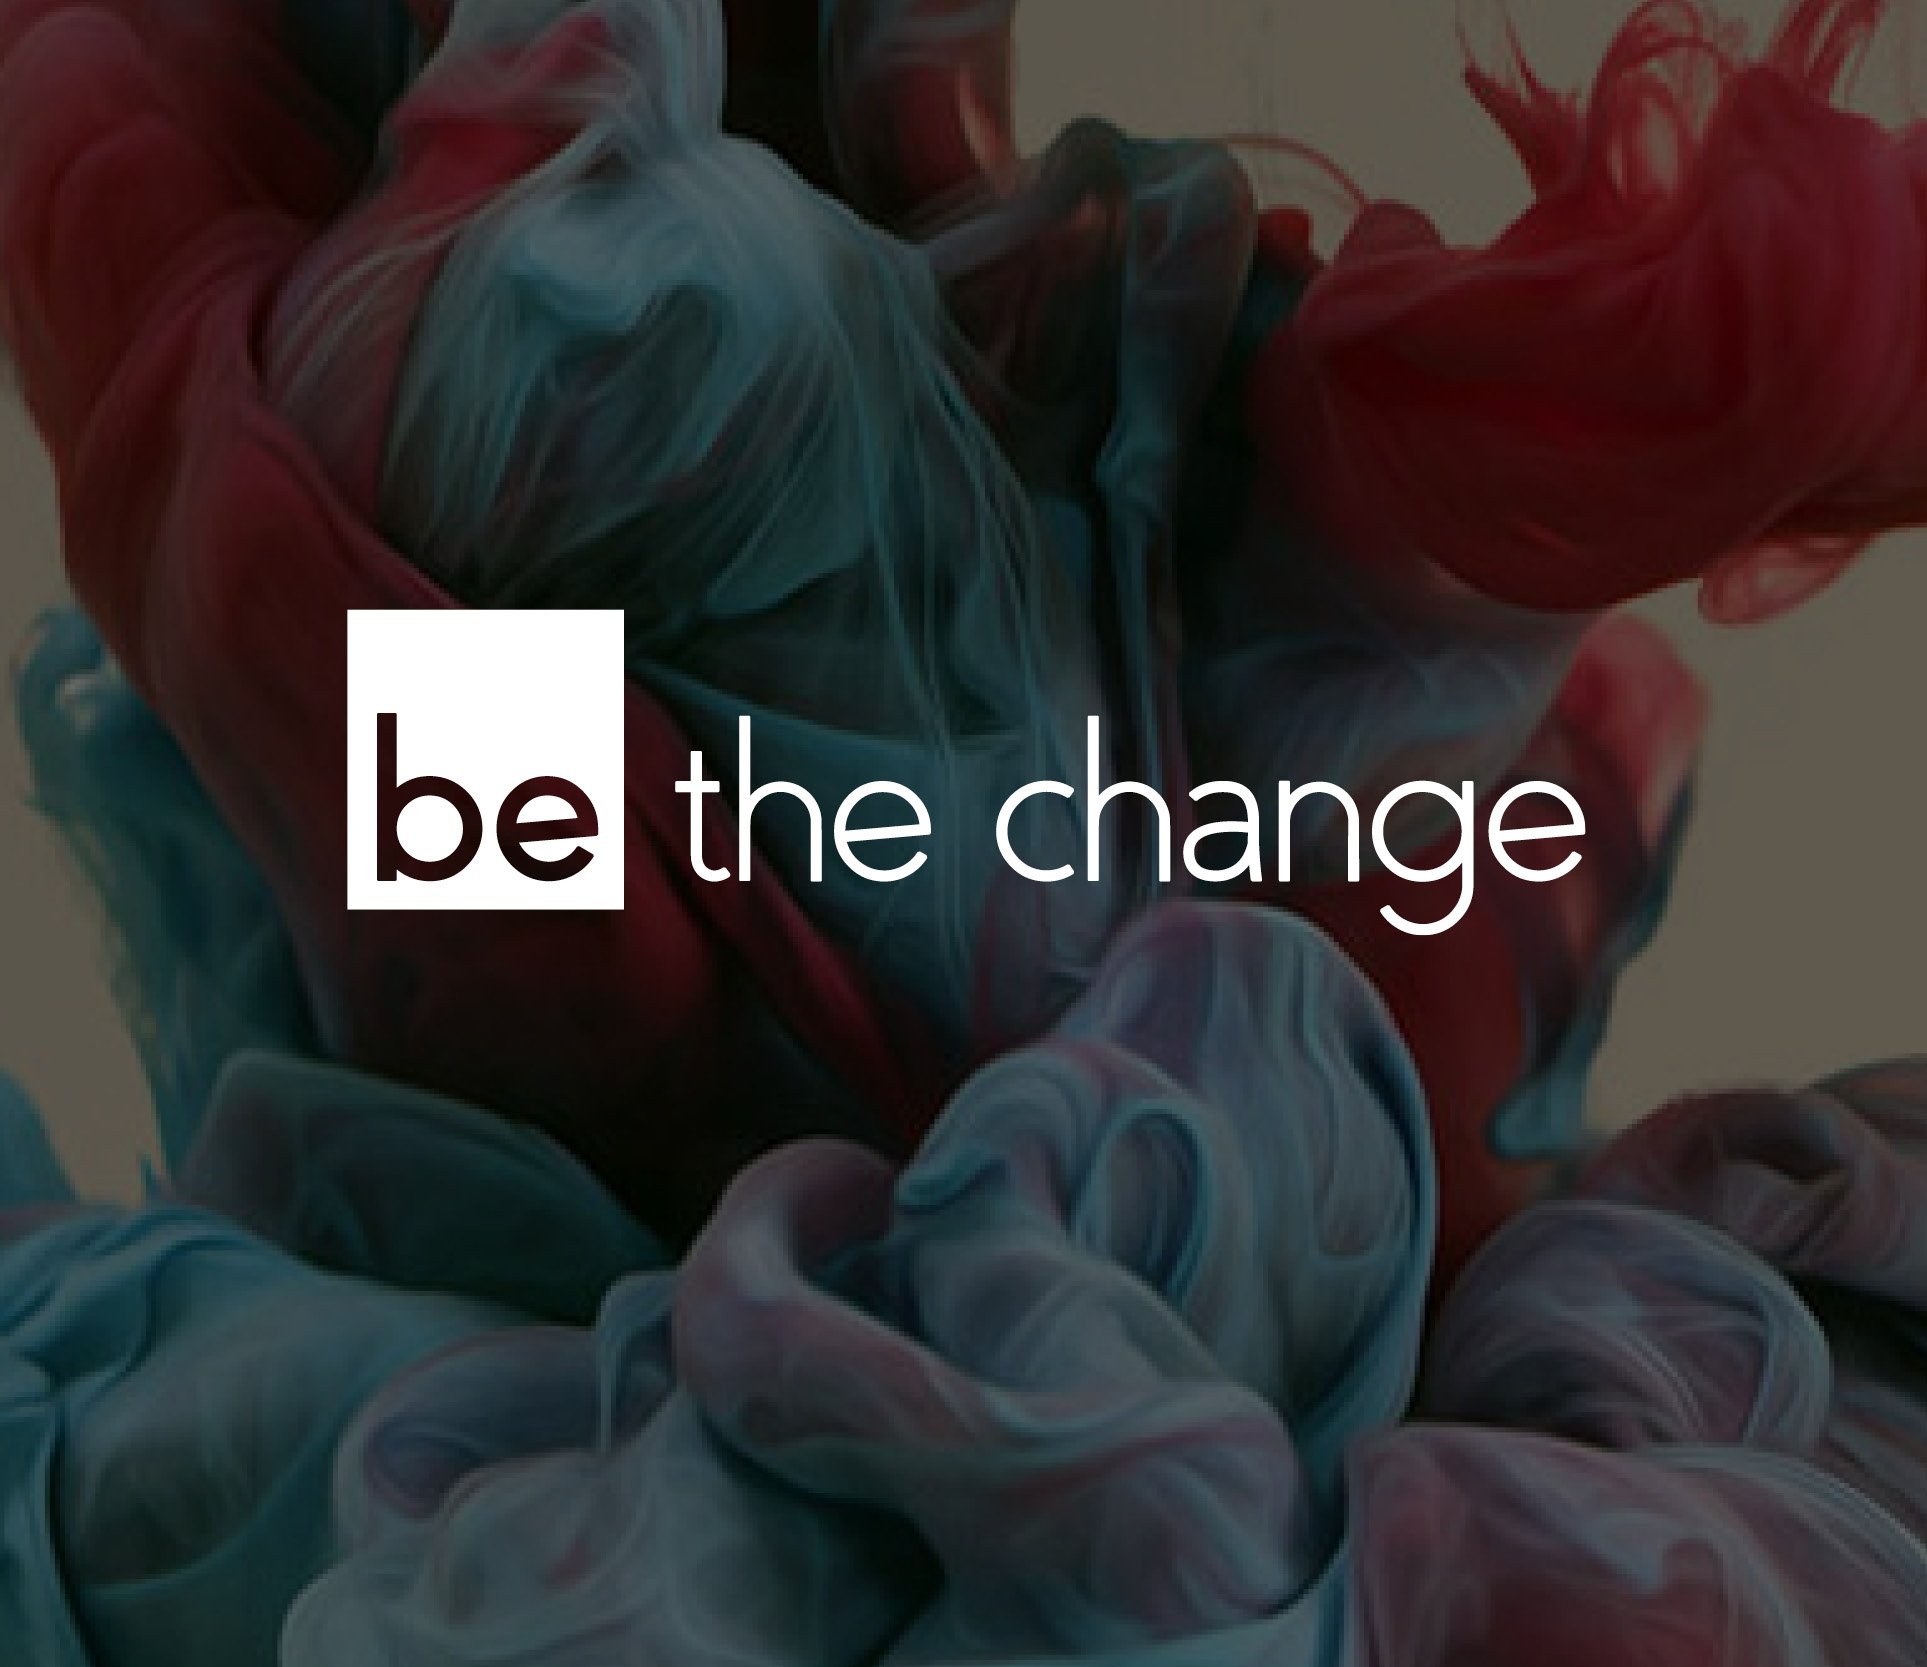 Join Captify For Our Upcoming BeTheChange Talks In NYC